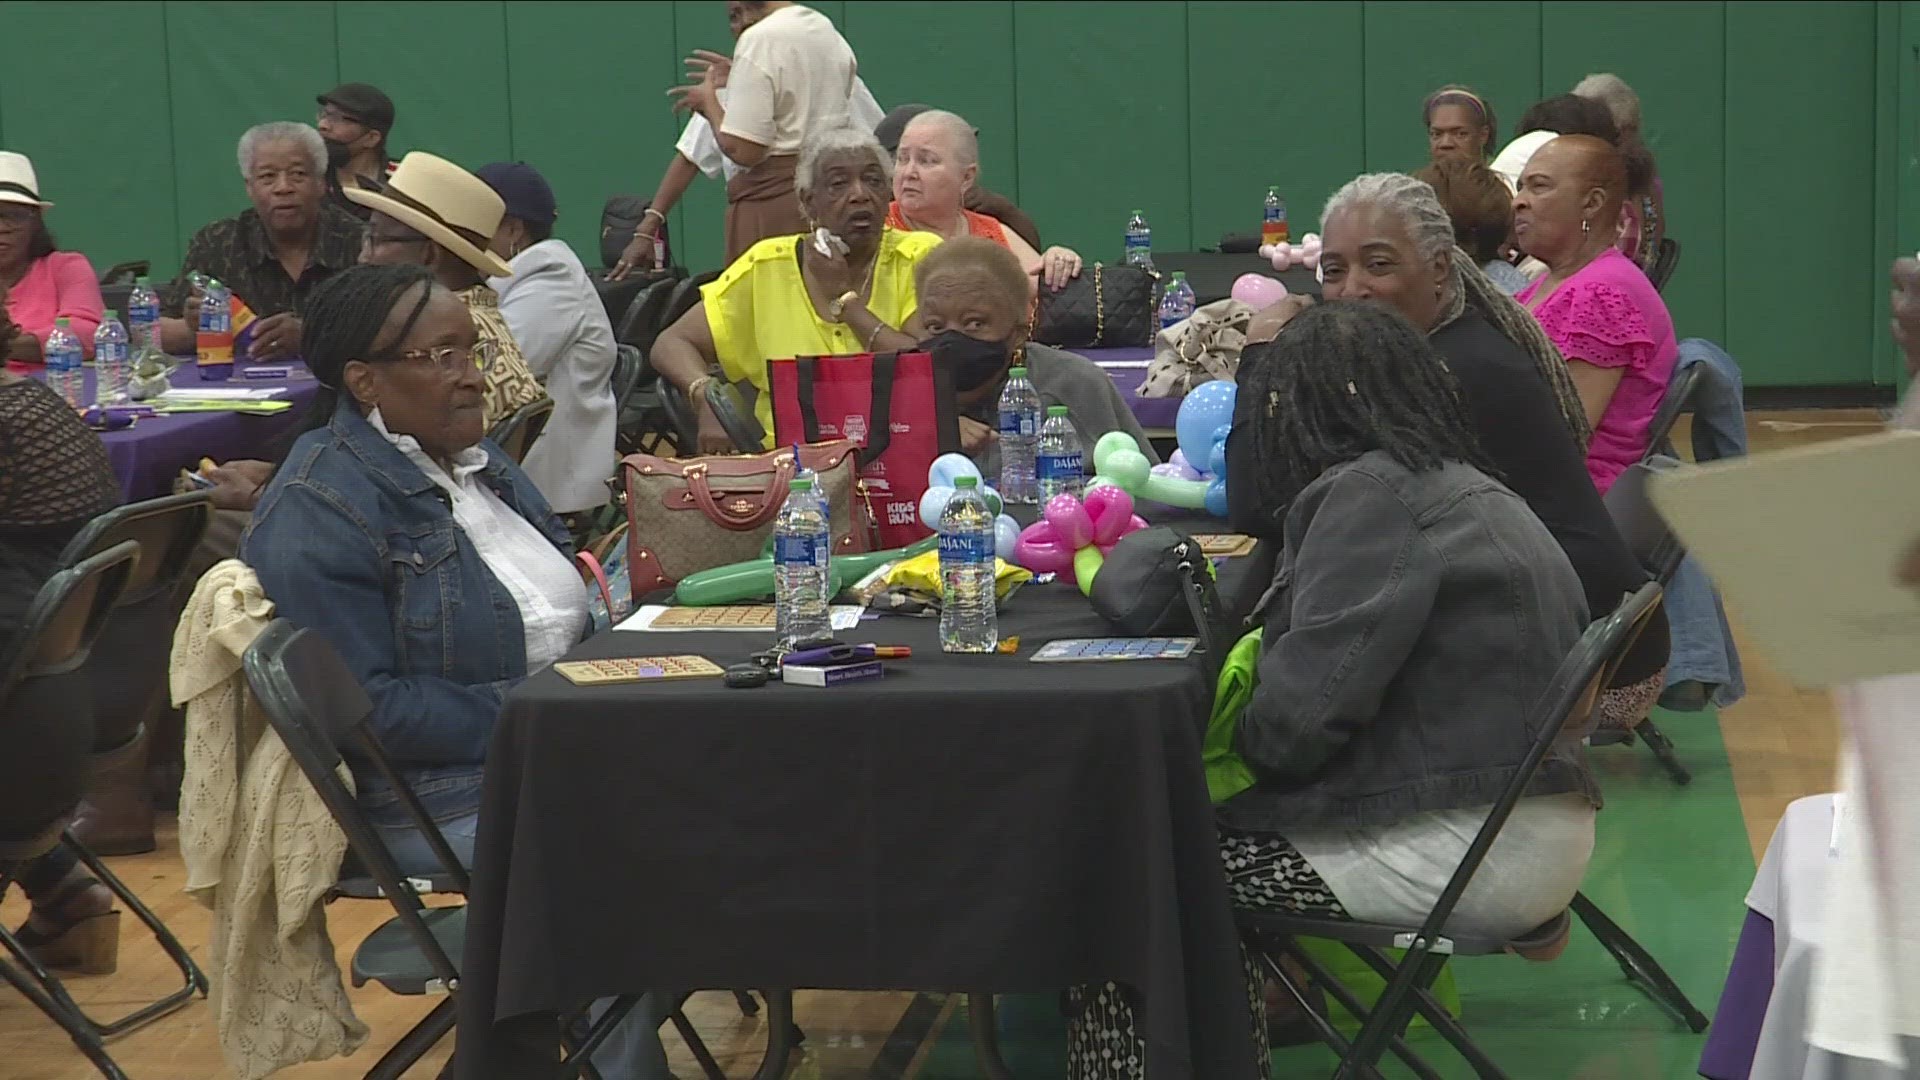 today seniors were invited out for a day full of food, music, bingo, and other entertainment.